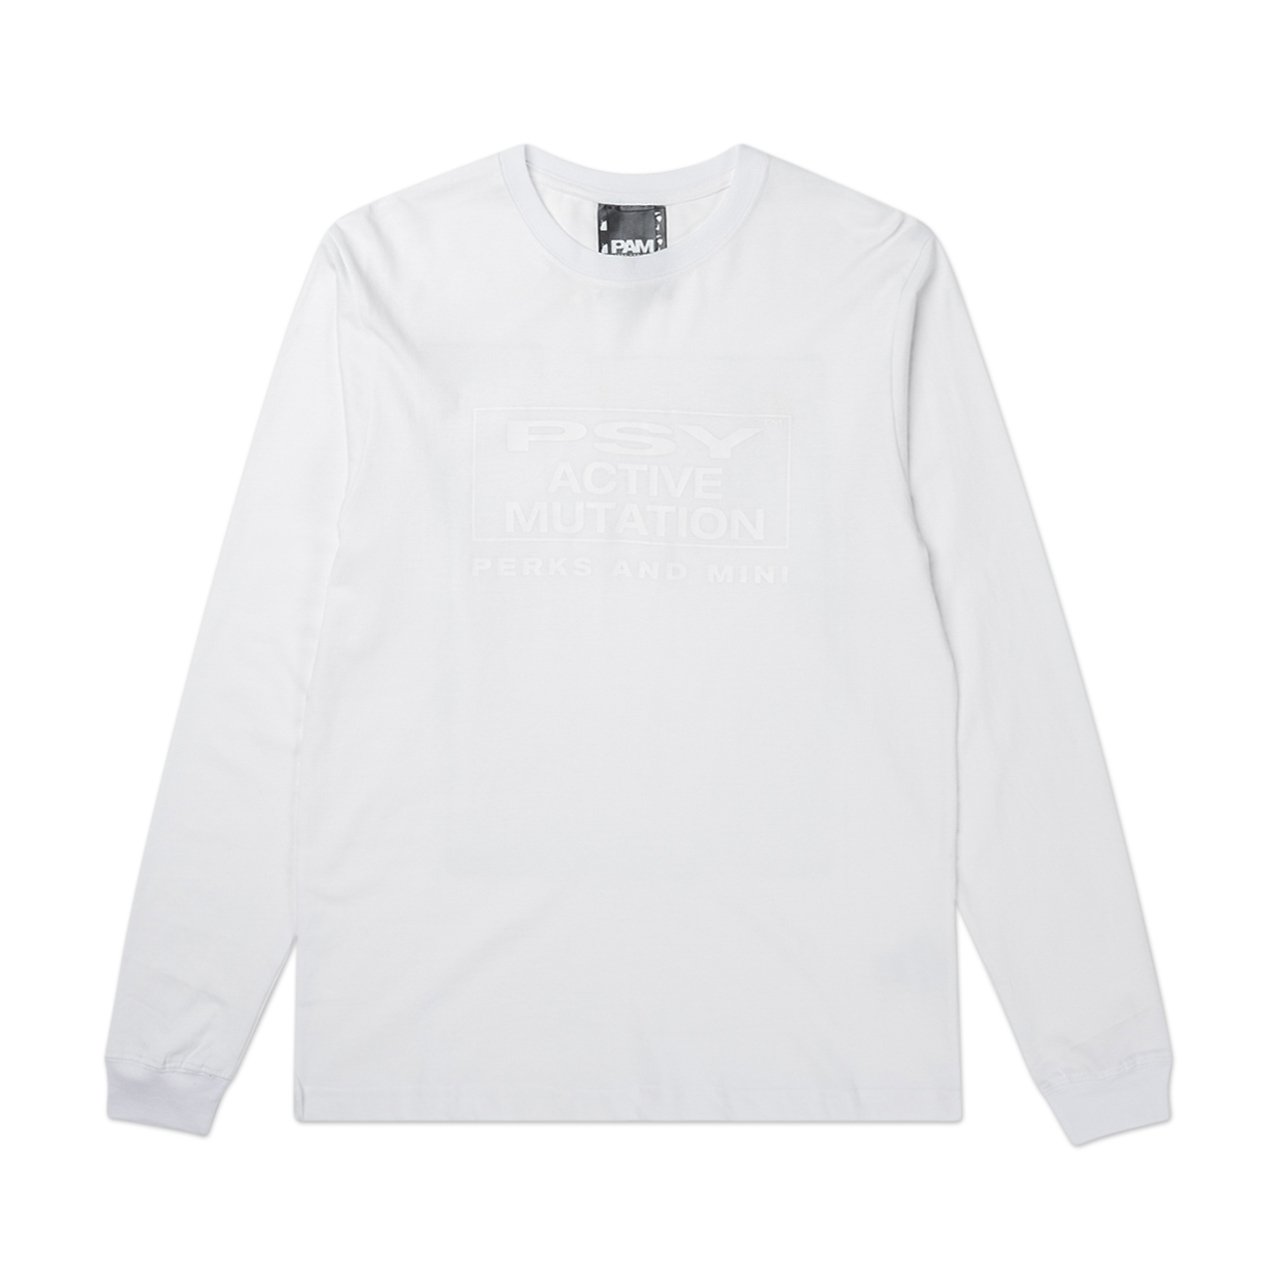 perks and mini sum of its parts l/s t-shirt (white) - 1360-b-ow - a.plus - Image - 1